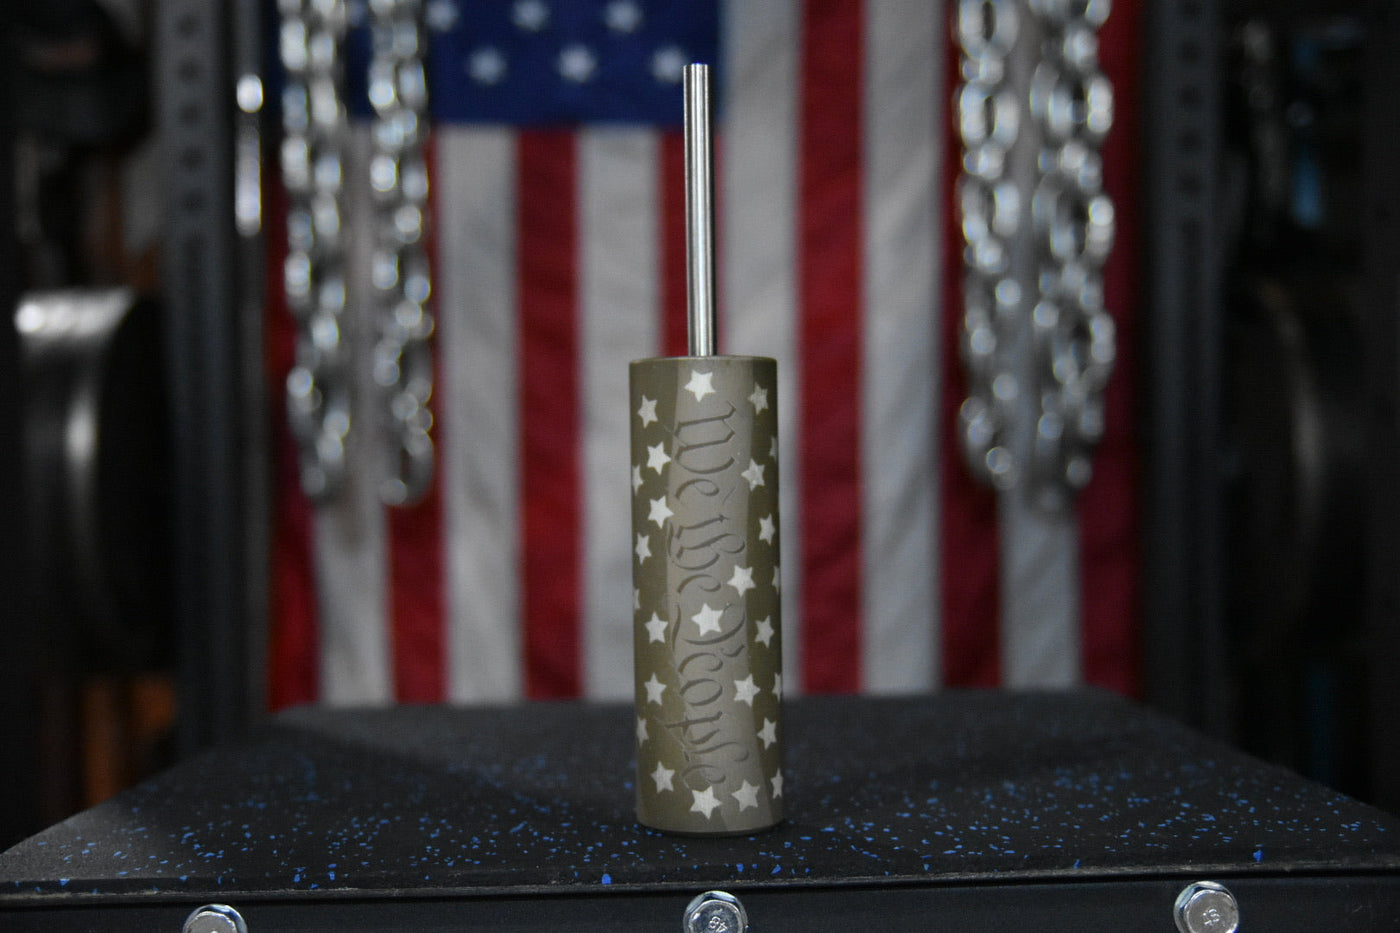 10mm Super Stack Weight Pin